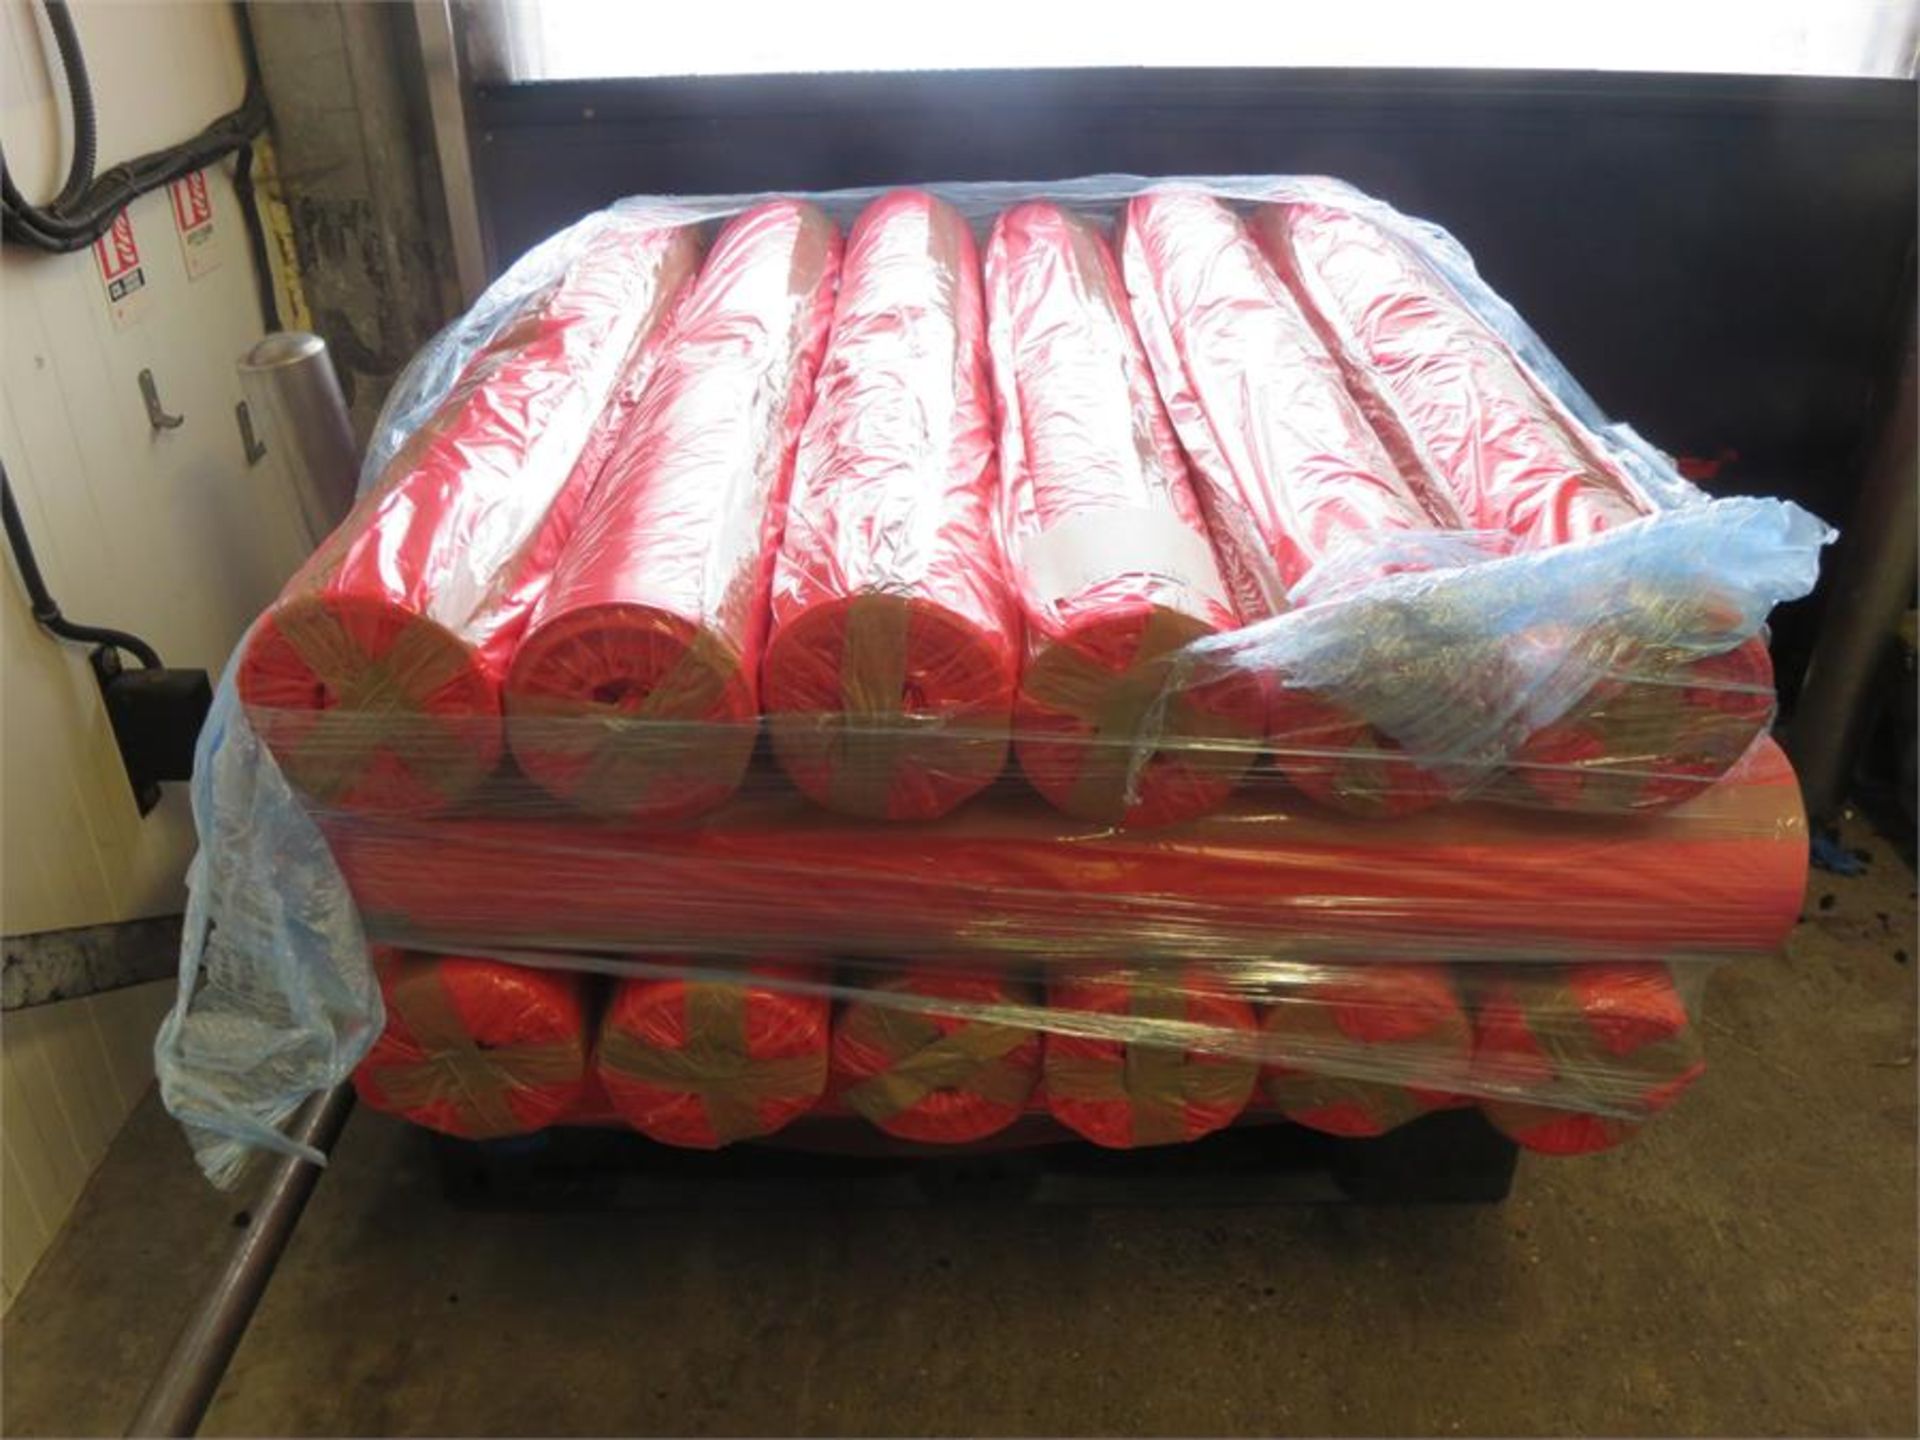 1 x Pallet of 1.25m rolls of red polythene wrapping bags. Lift out £50. CF2-995